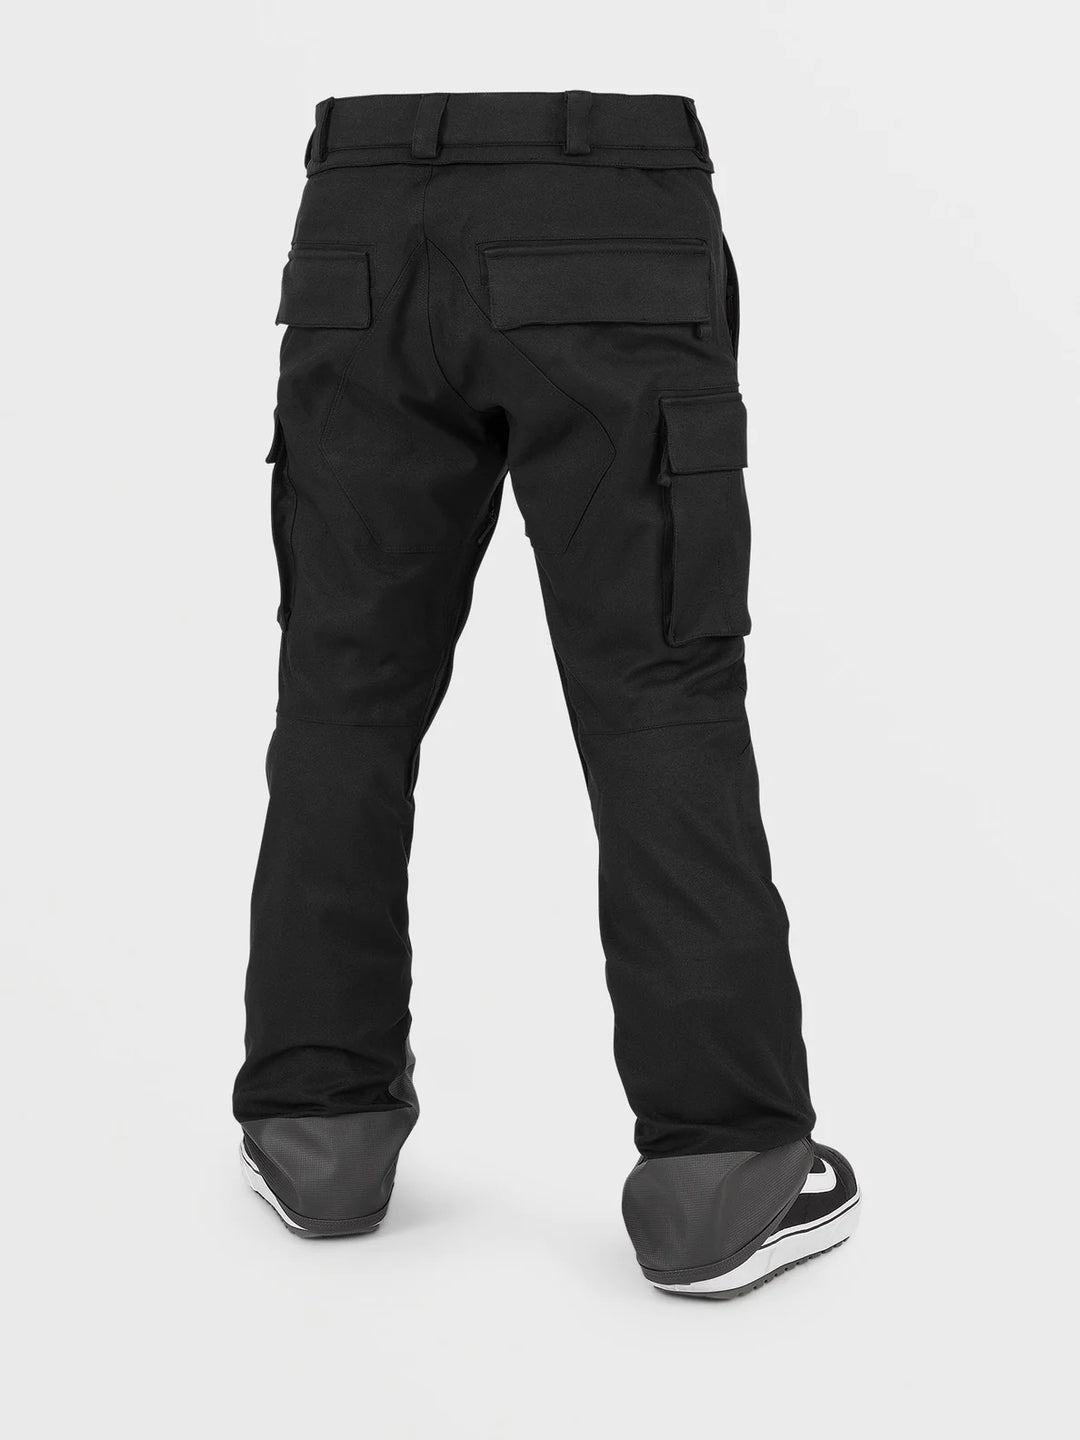 Volcom New Articulated Snowboard Pants Black